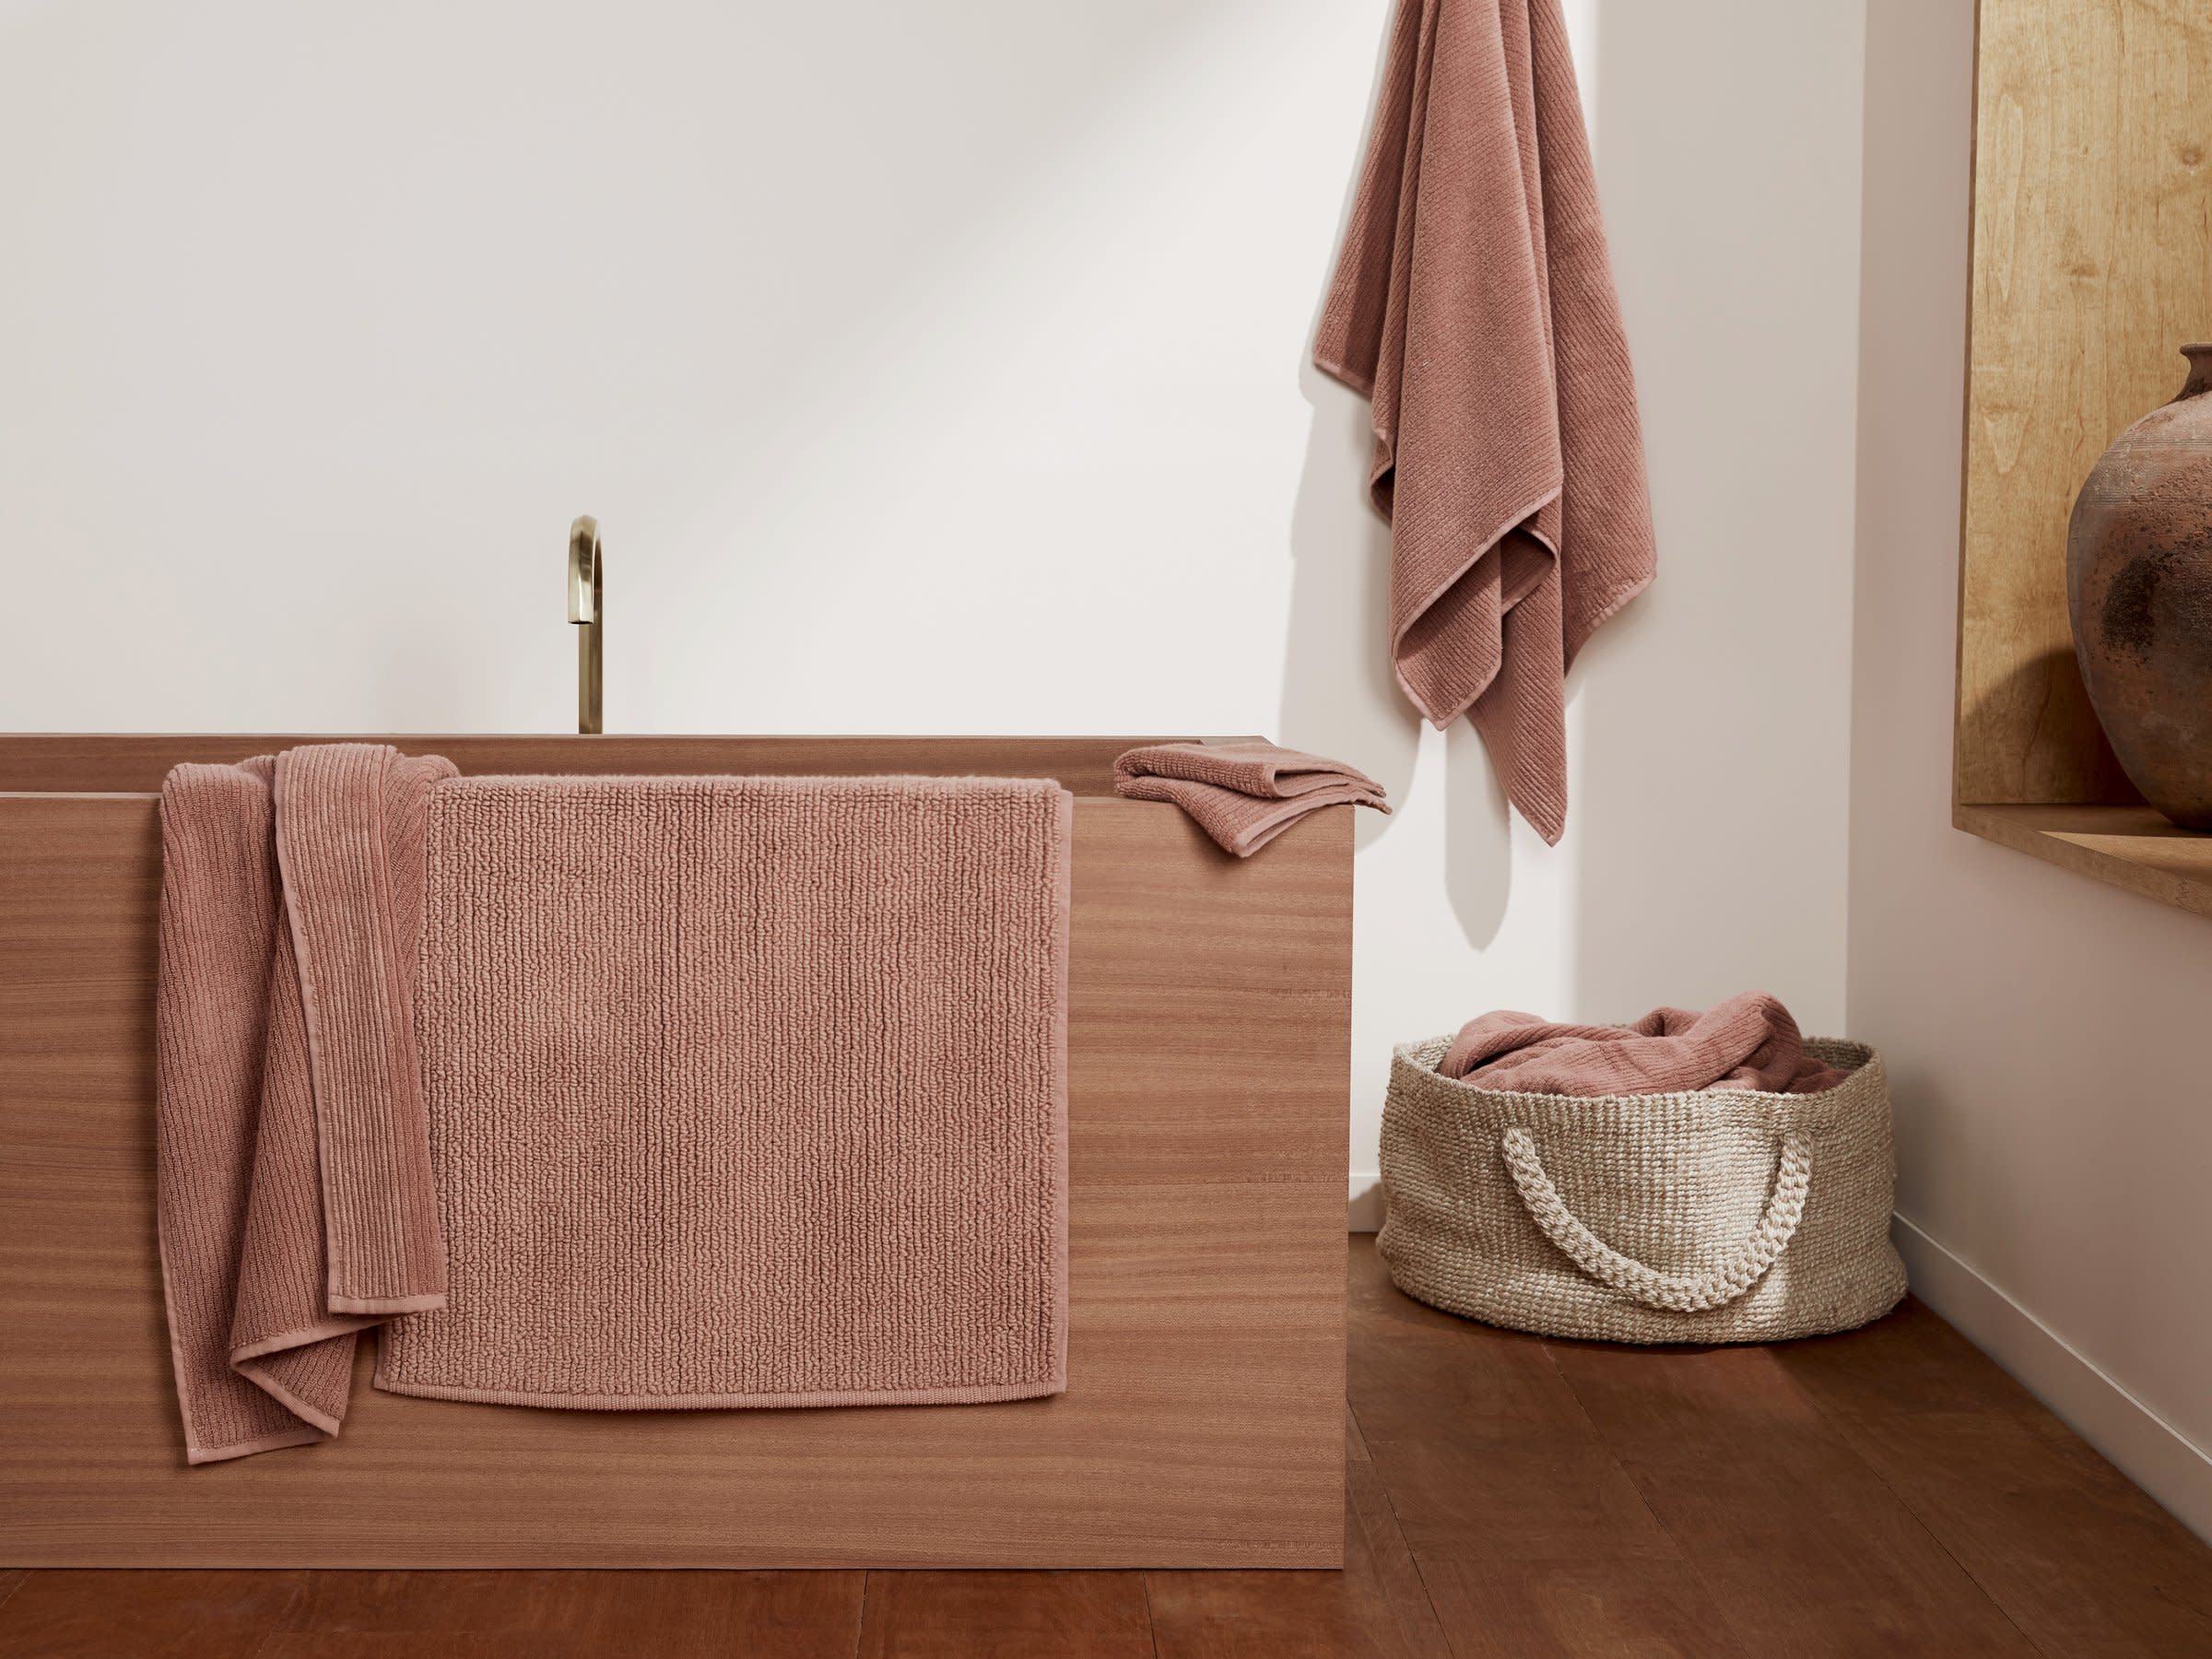 Clay Soft Rib Towels Shown In A Room